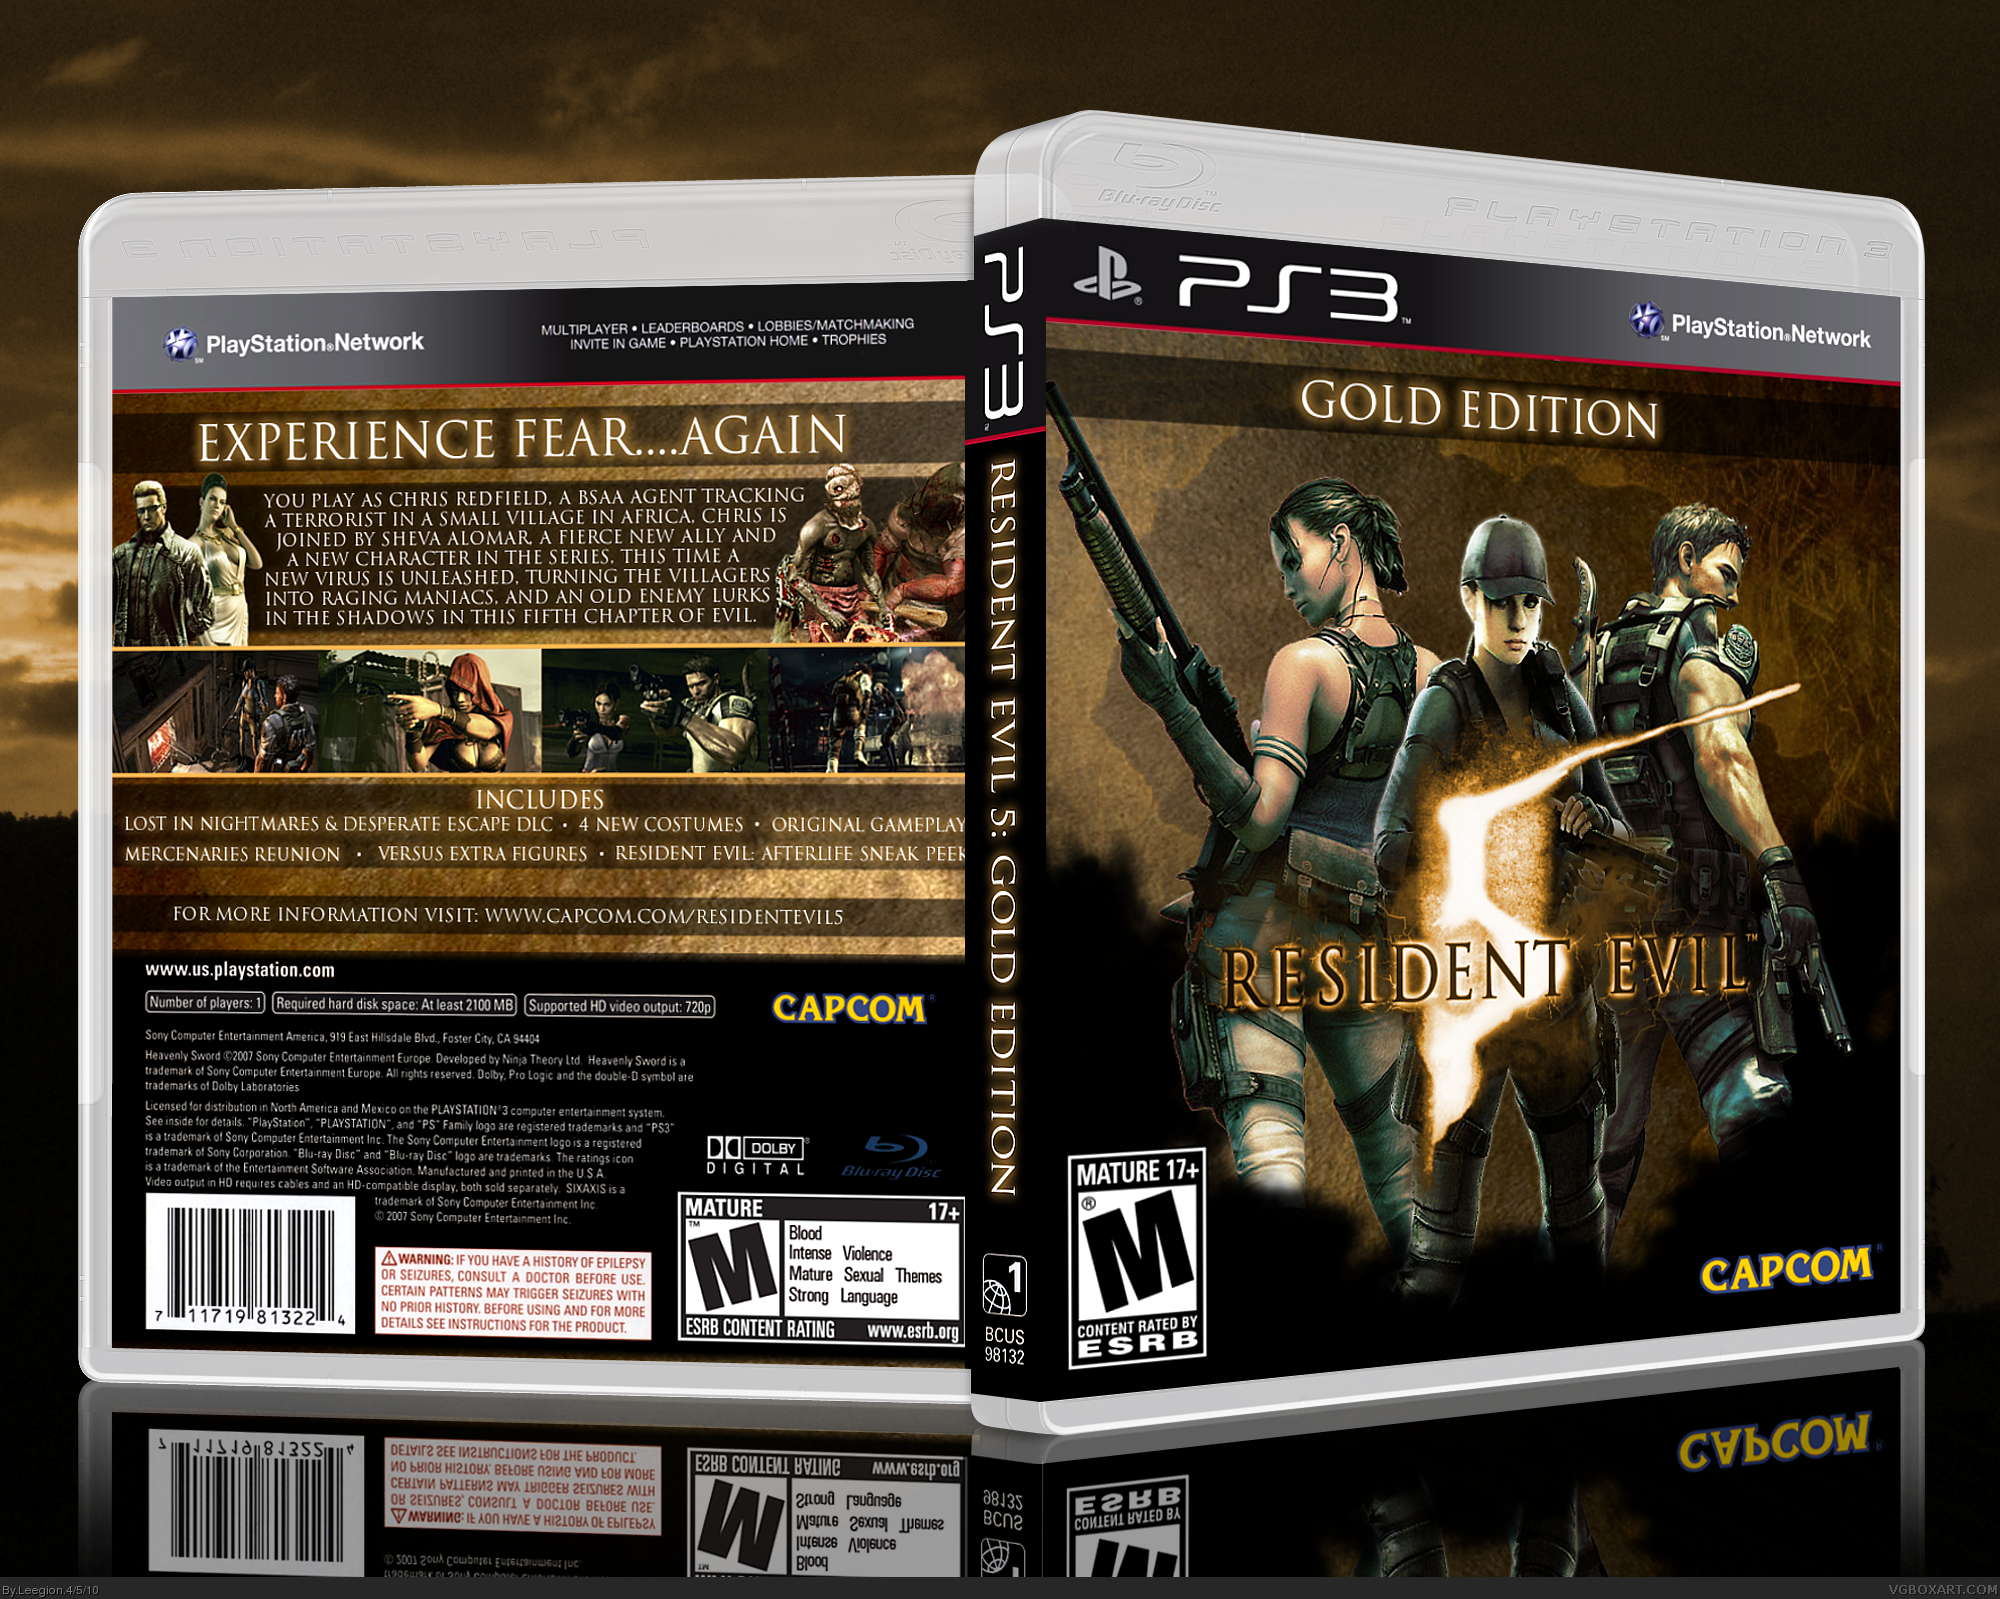 Resident Evil 5 Gold Edition box cover